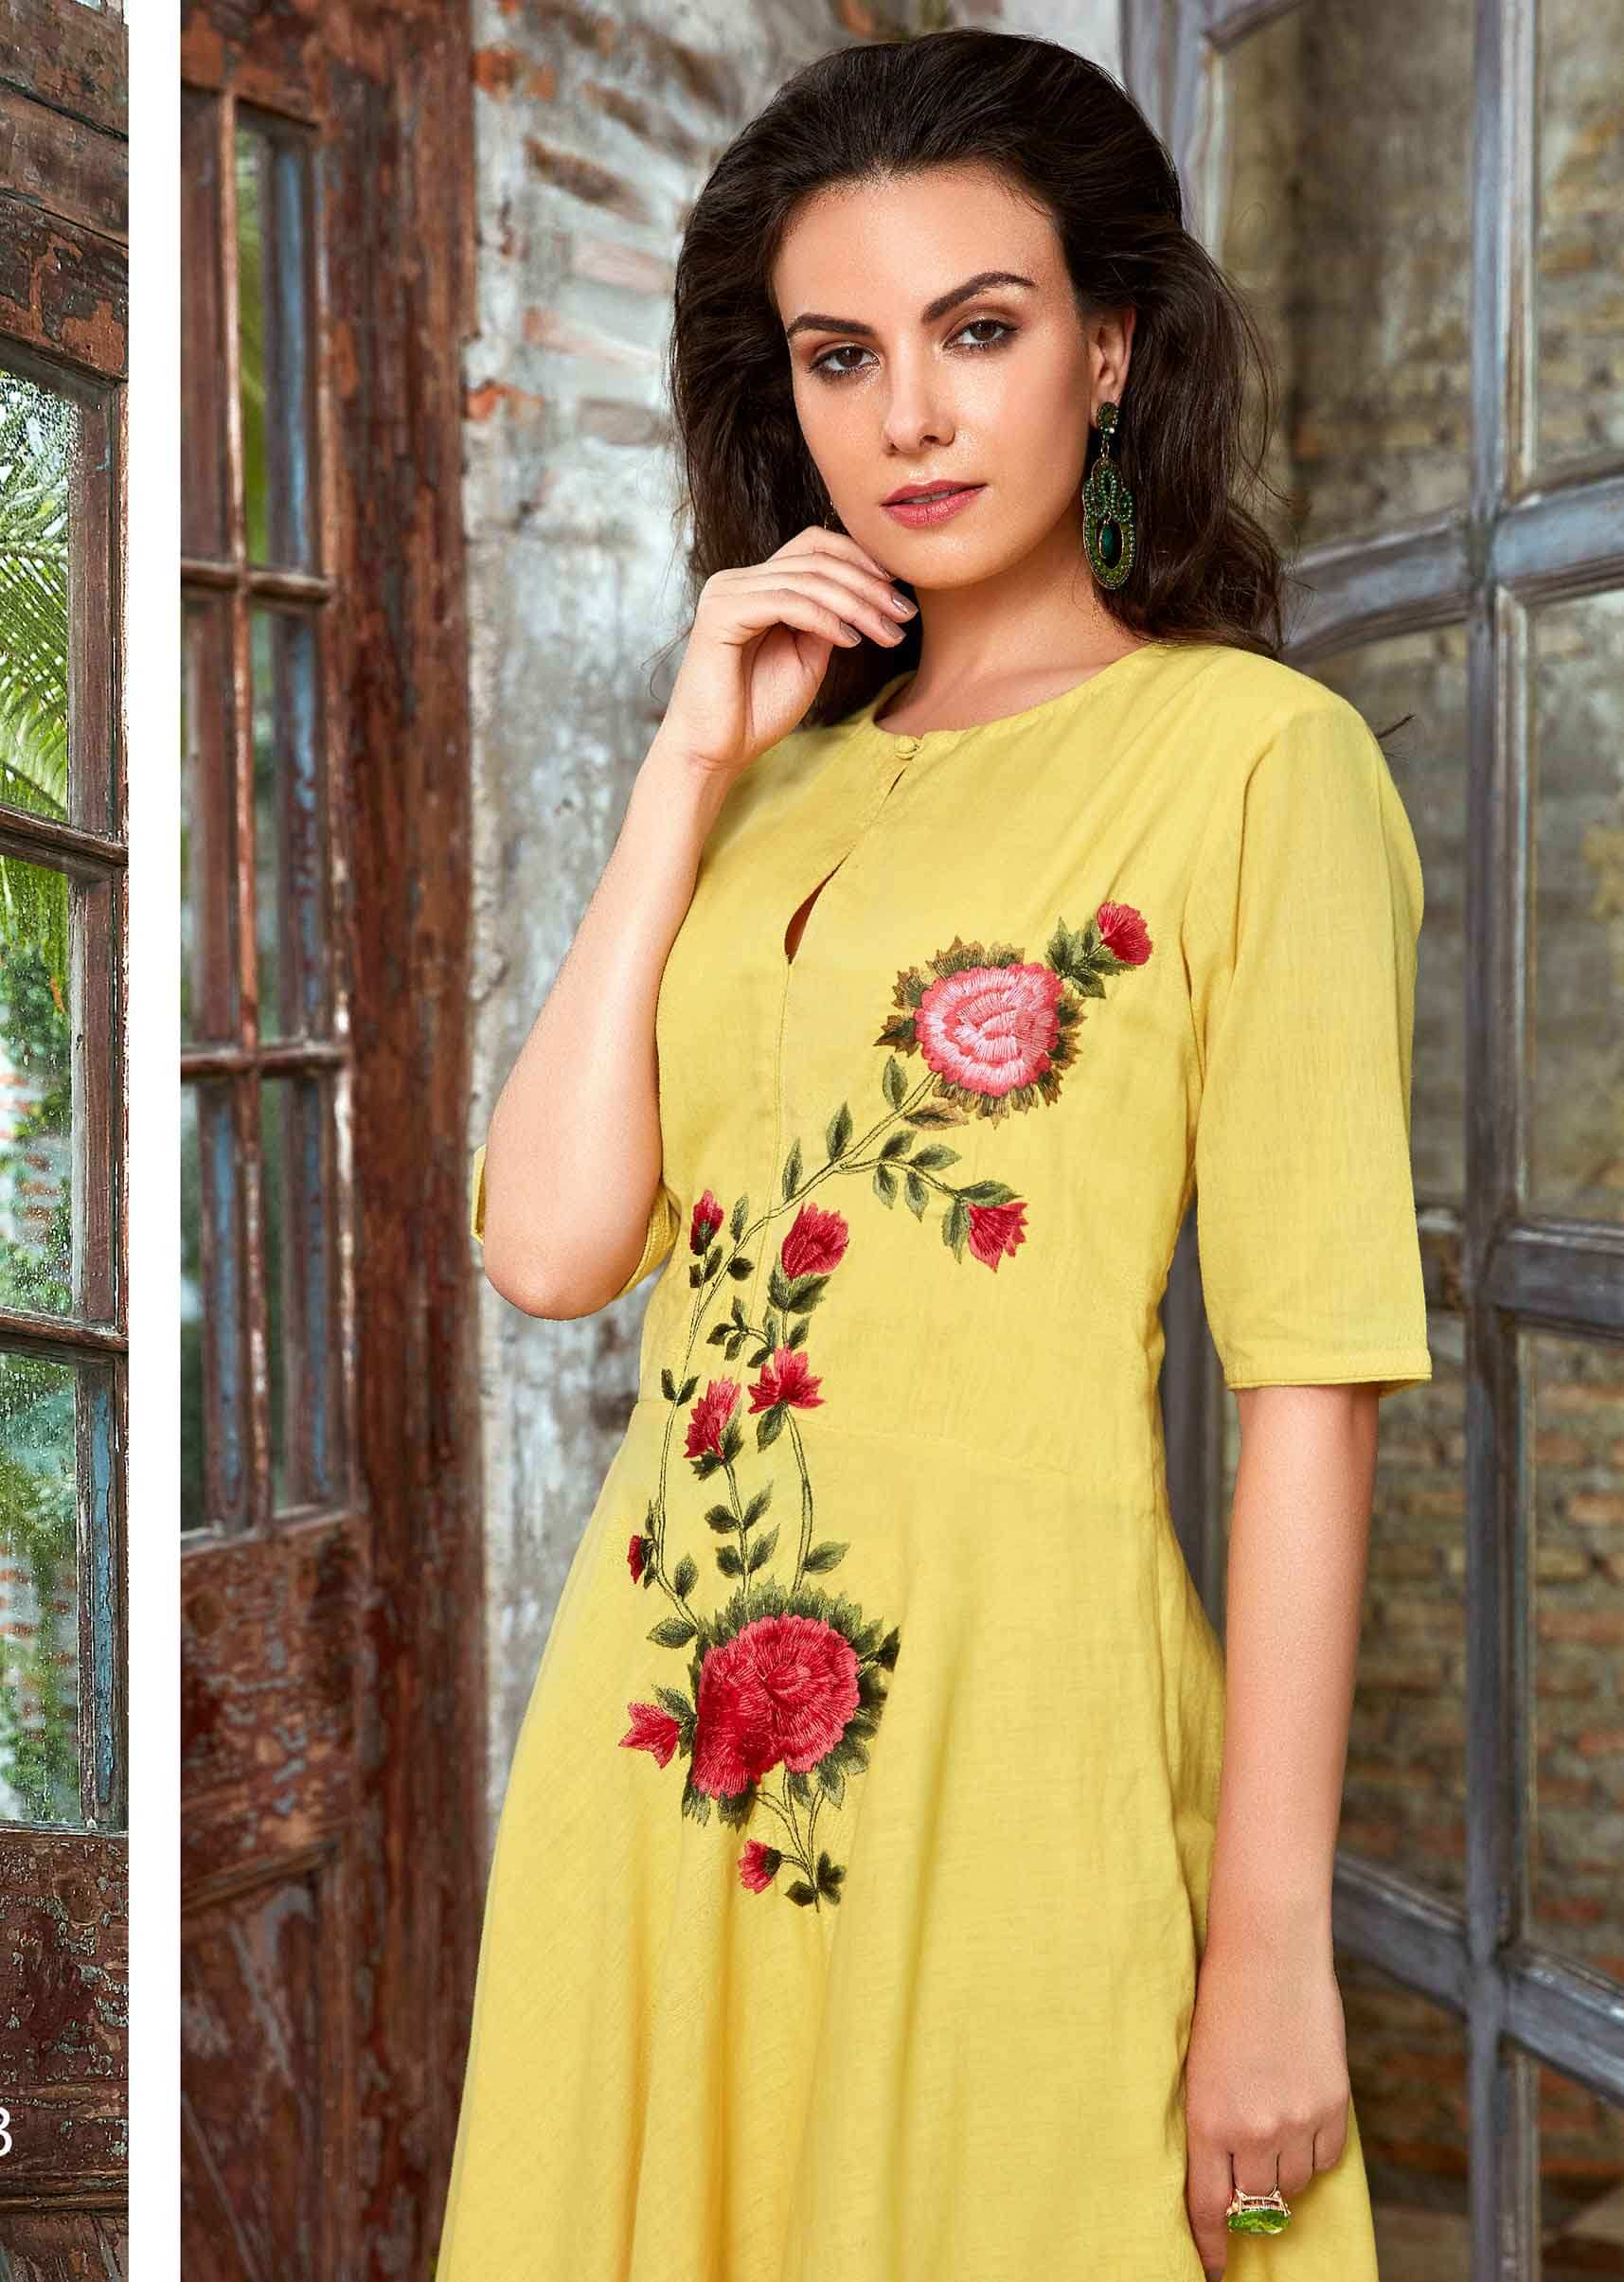 Macaroon yellow cotton suit in floral resham embroidery on the center bodice and waist 